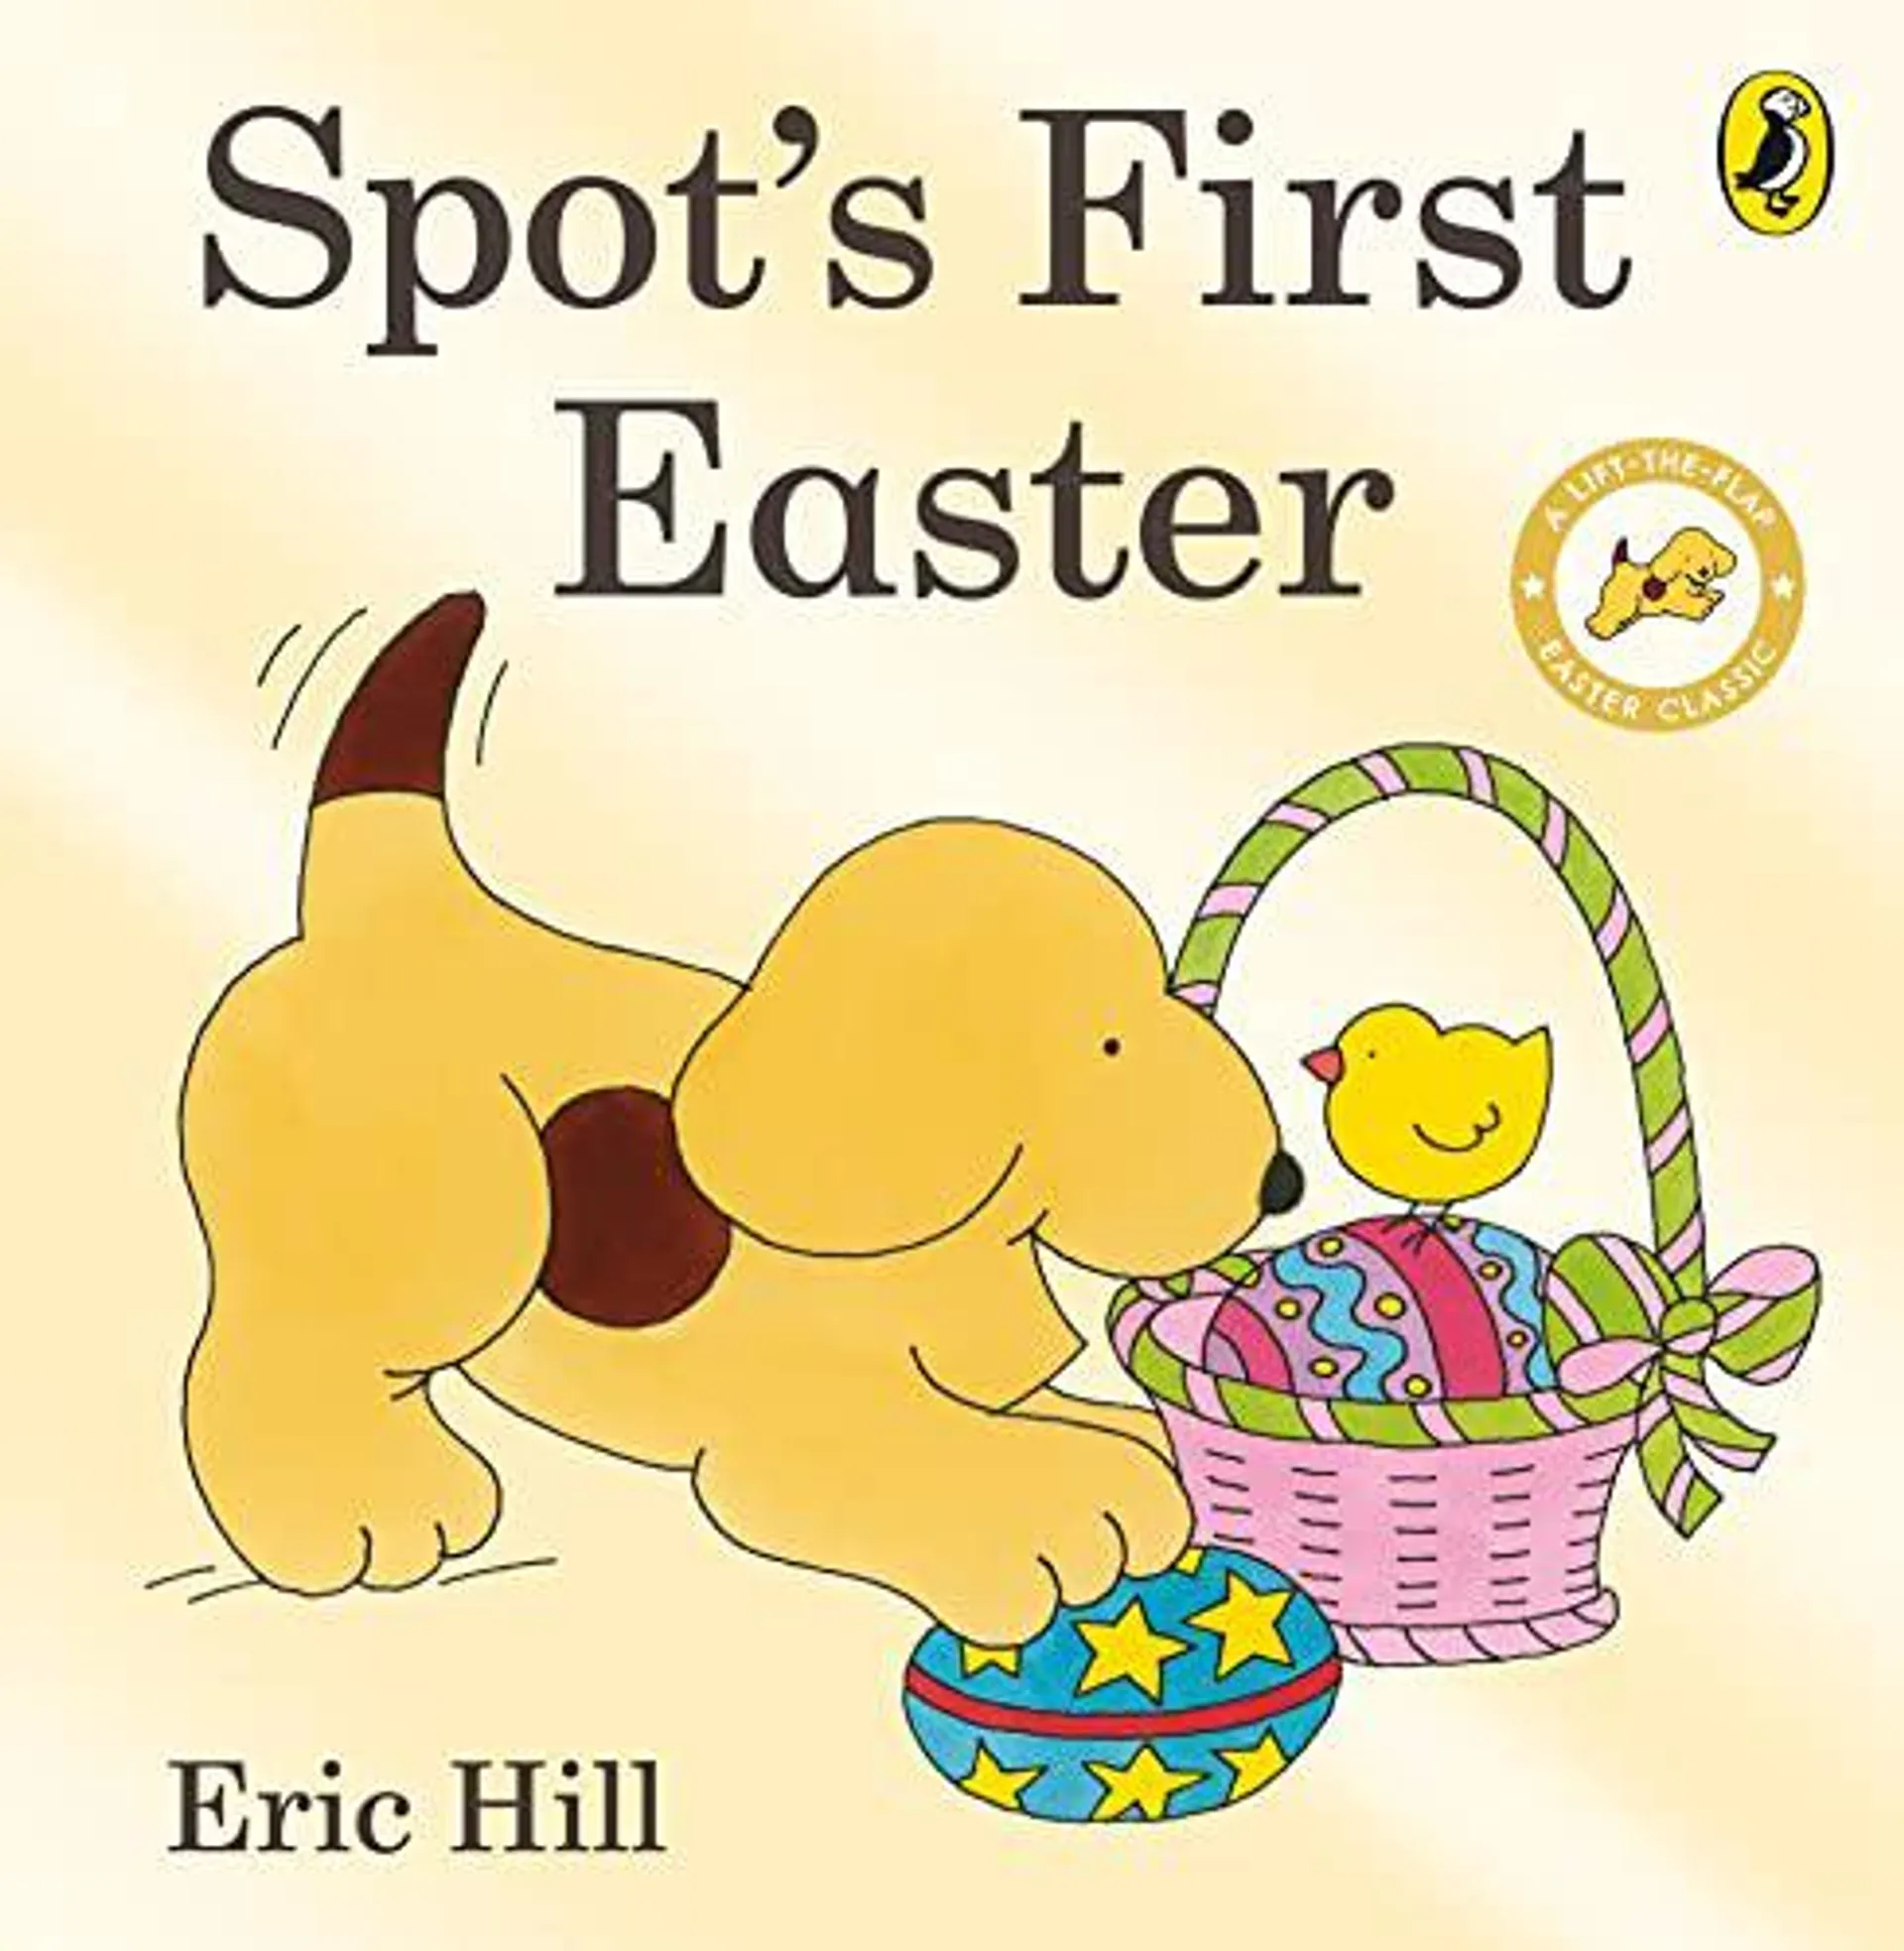 Spot's First Easter Board Book by Eric Hill